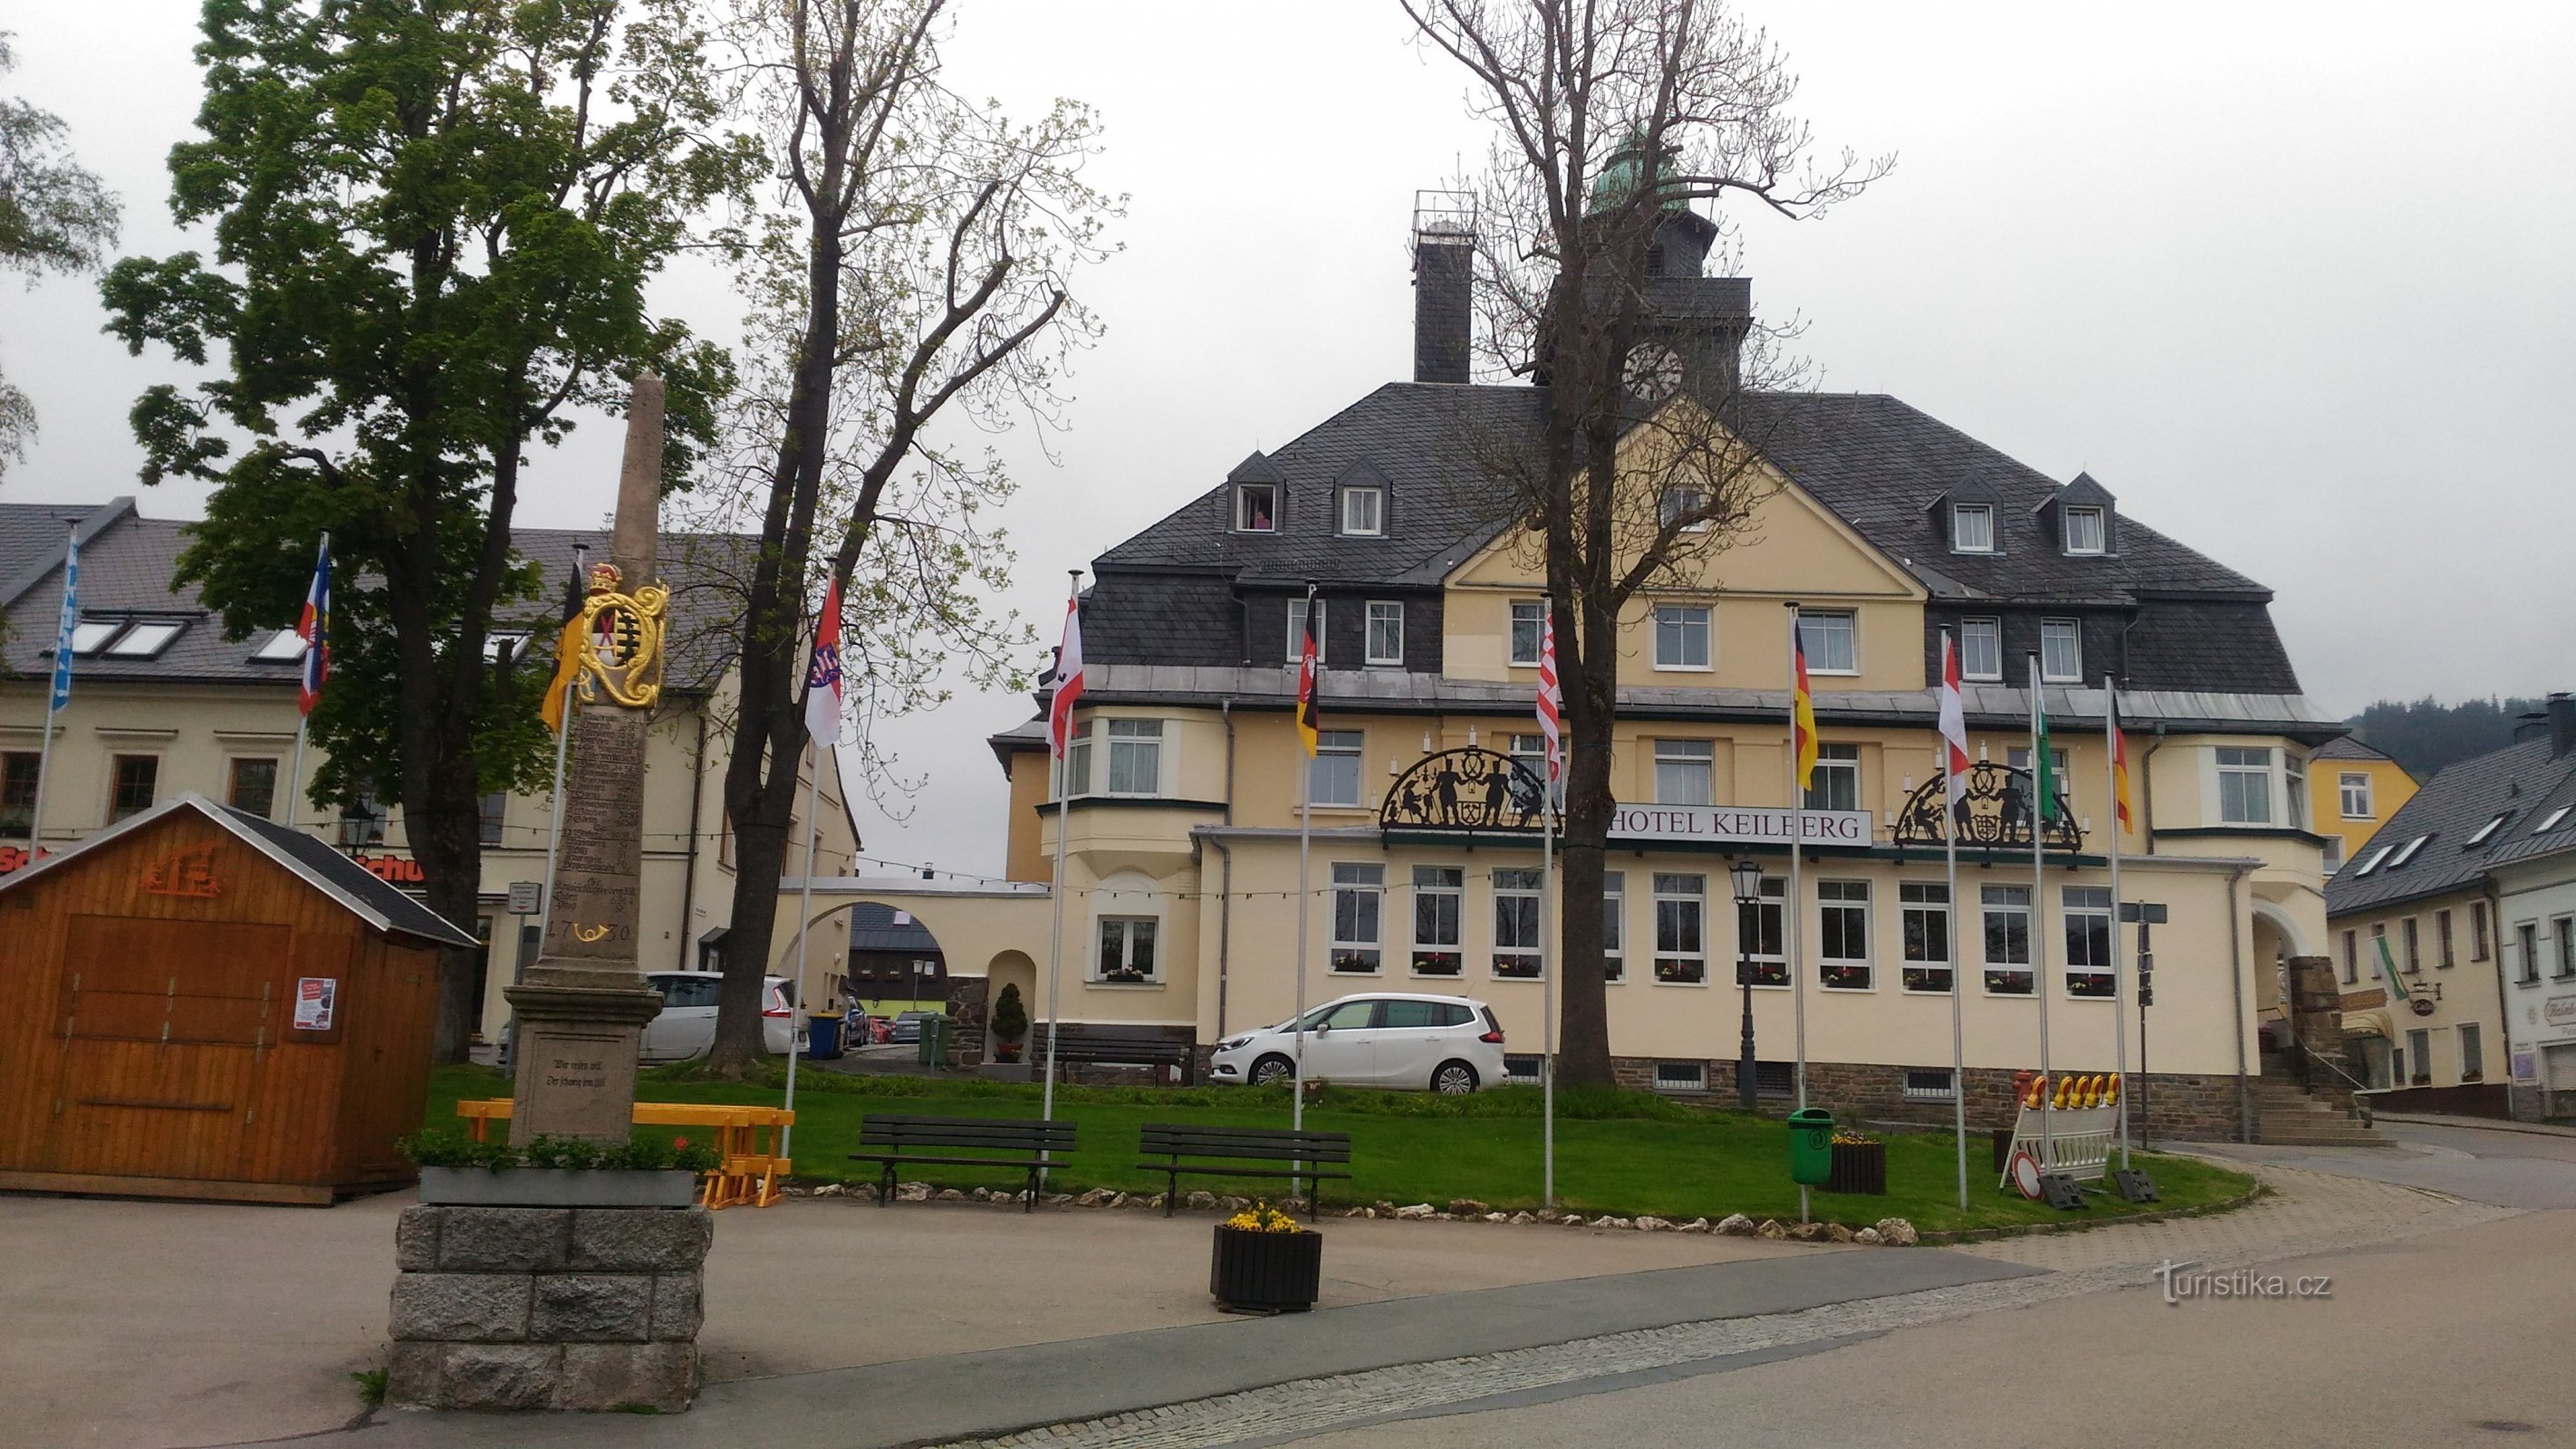 Oberwiesenthal square